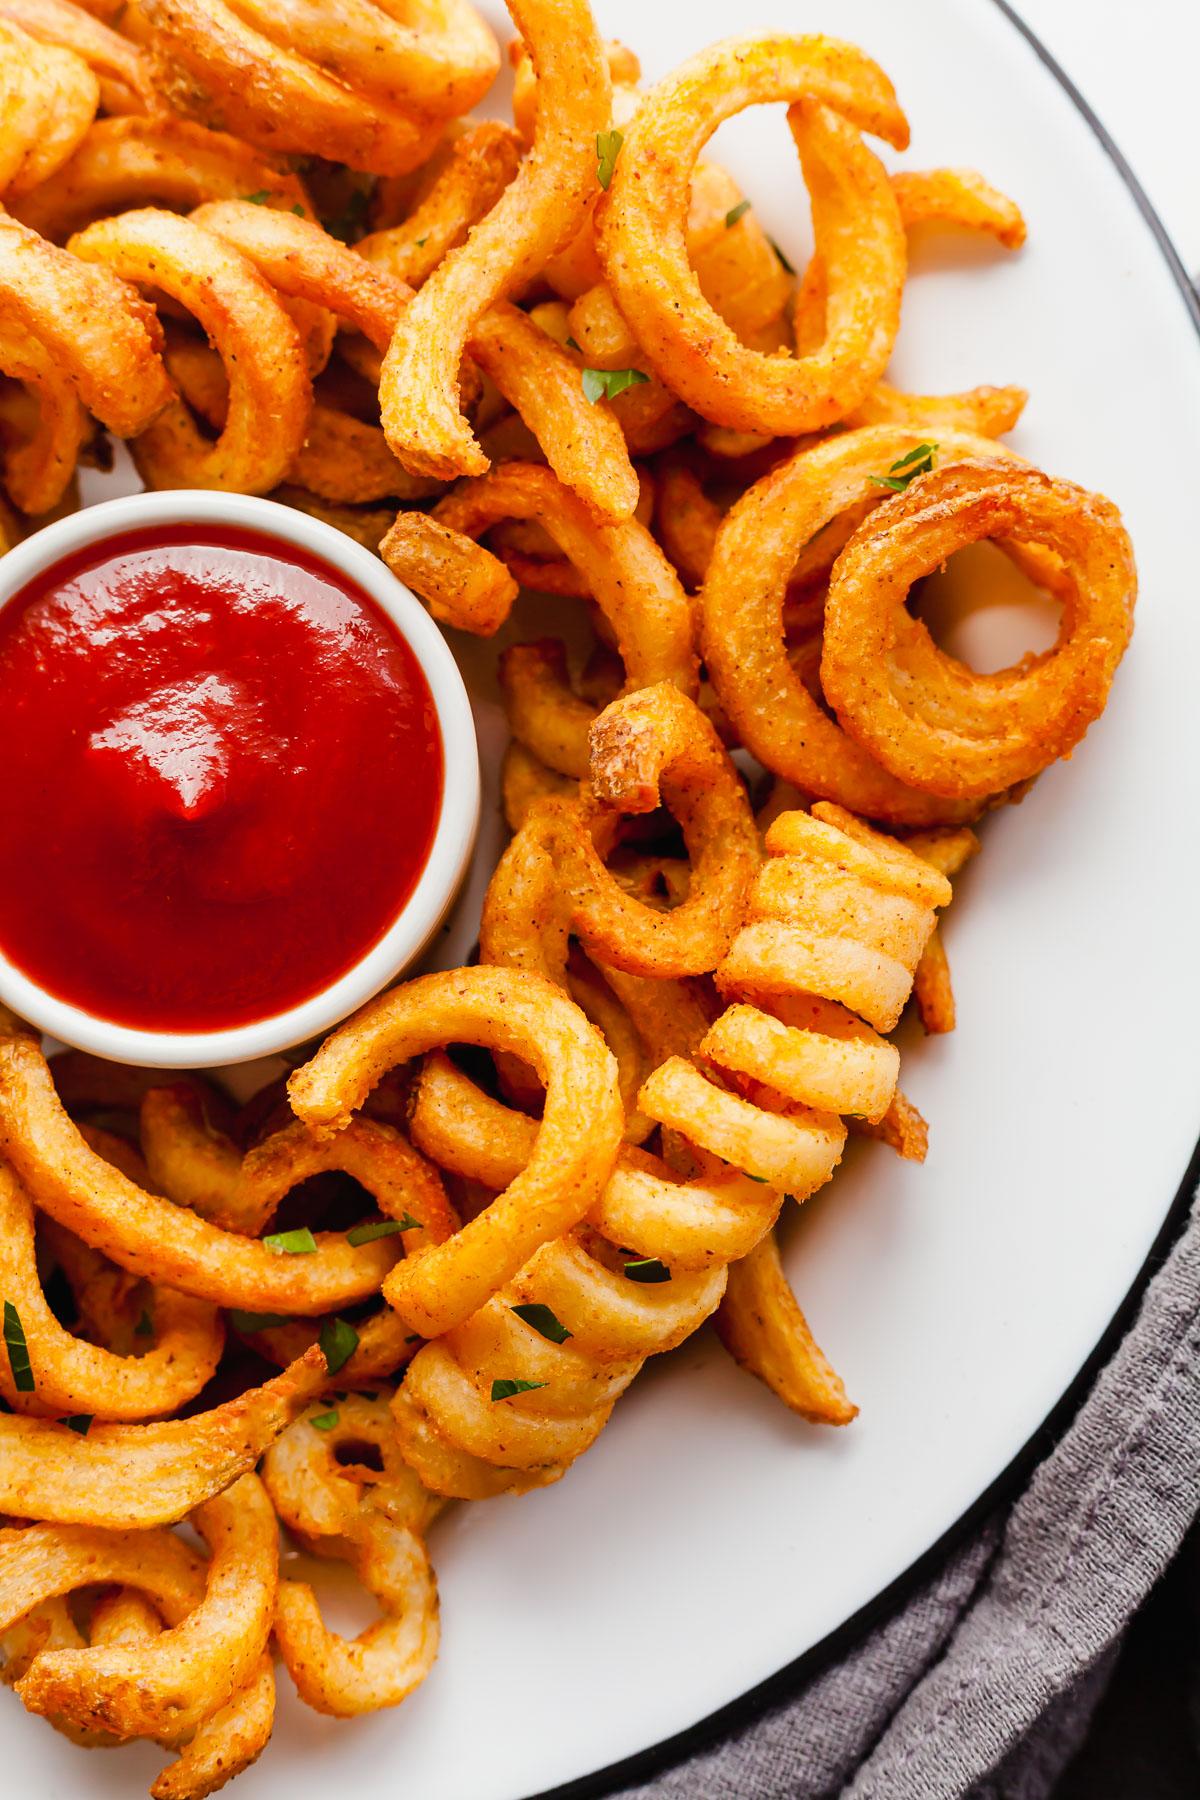 hand dipping a curly fry into a container of ketchup